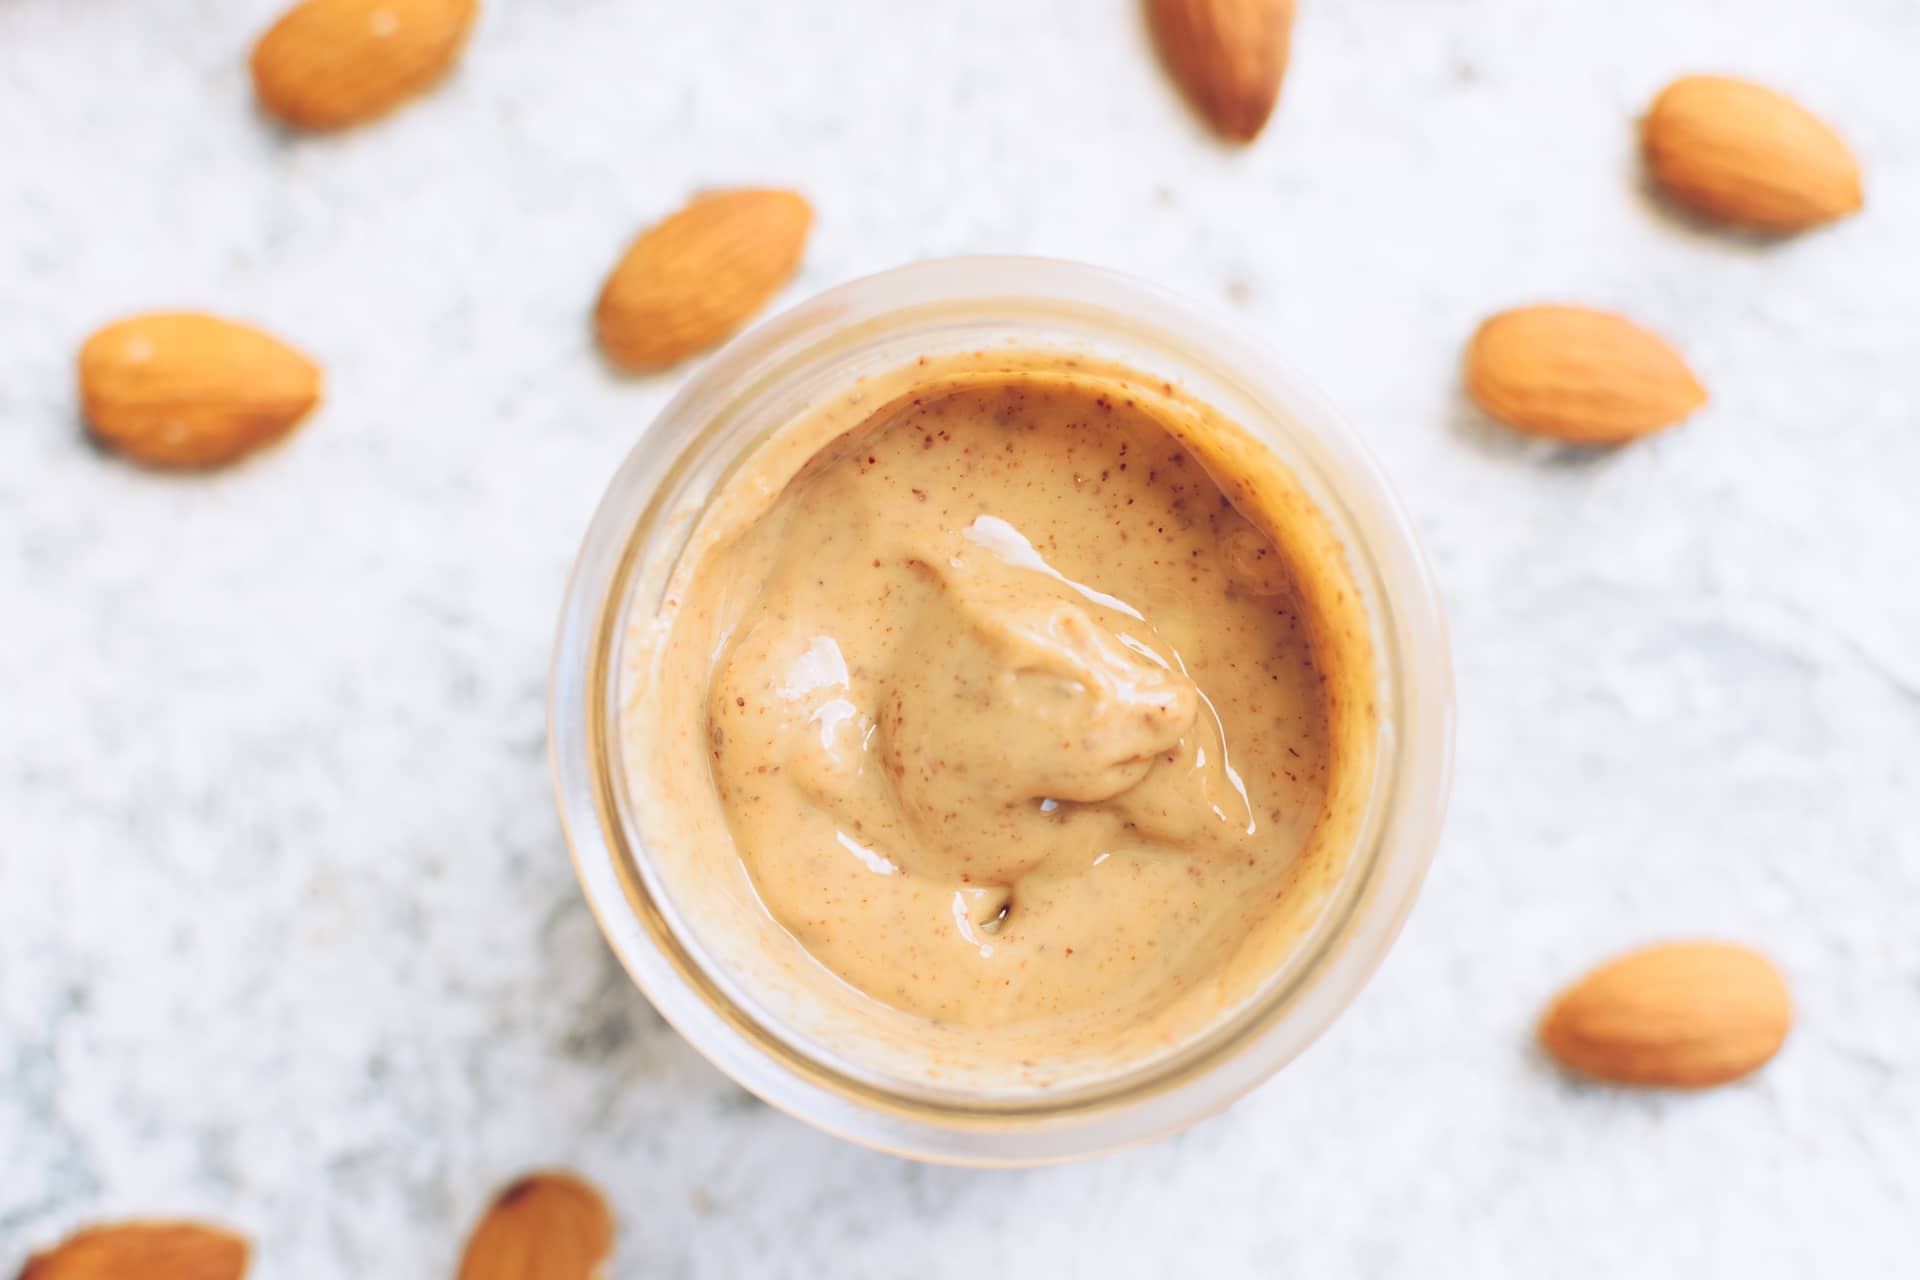 Almond nut butter in glass jar. Homemade raw organic almond nuts paste on grey background. Healthy natural food.